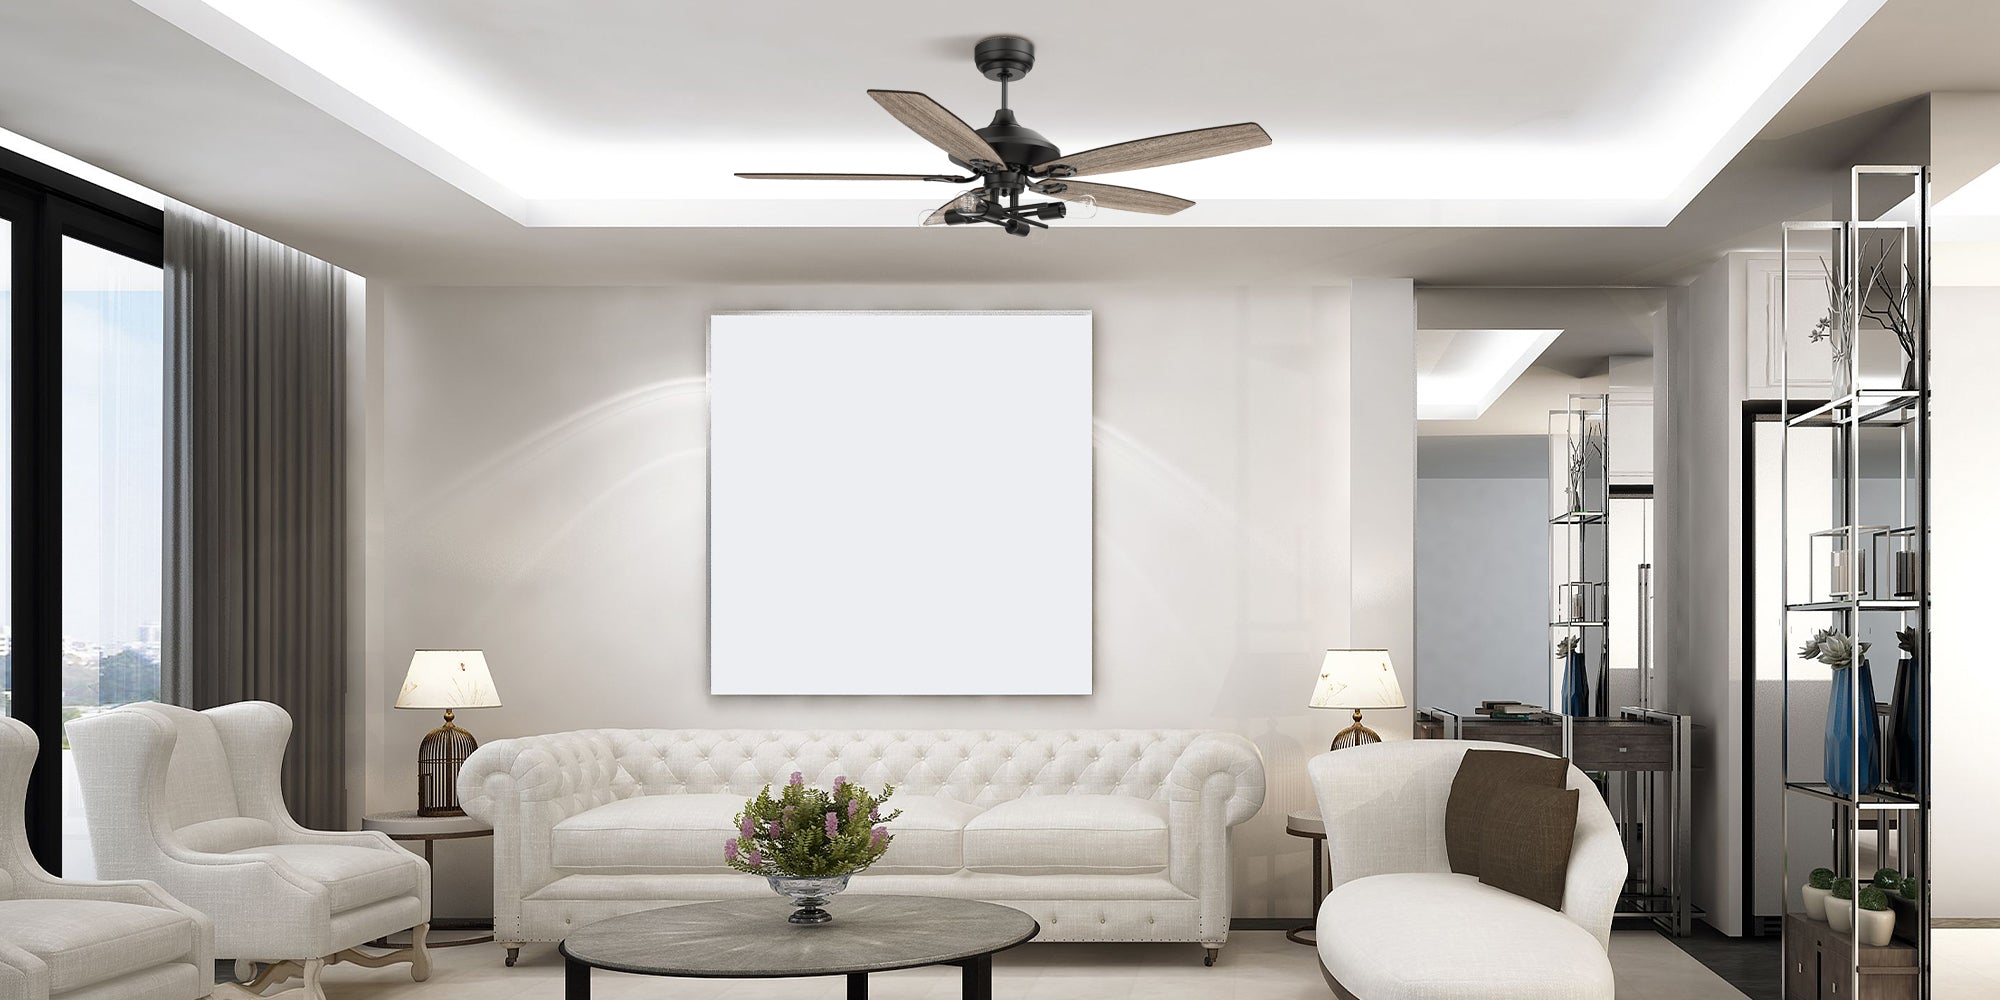 Smafan-Aero-52-inch-Modernist-Ceiling-Fan-with-Remote-and-Light-Kit